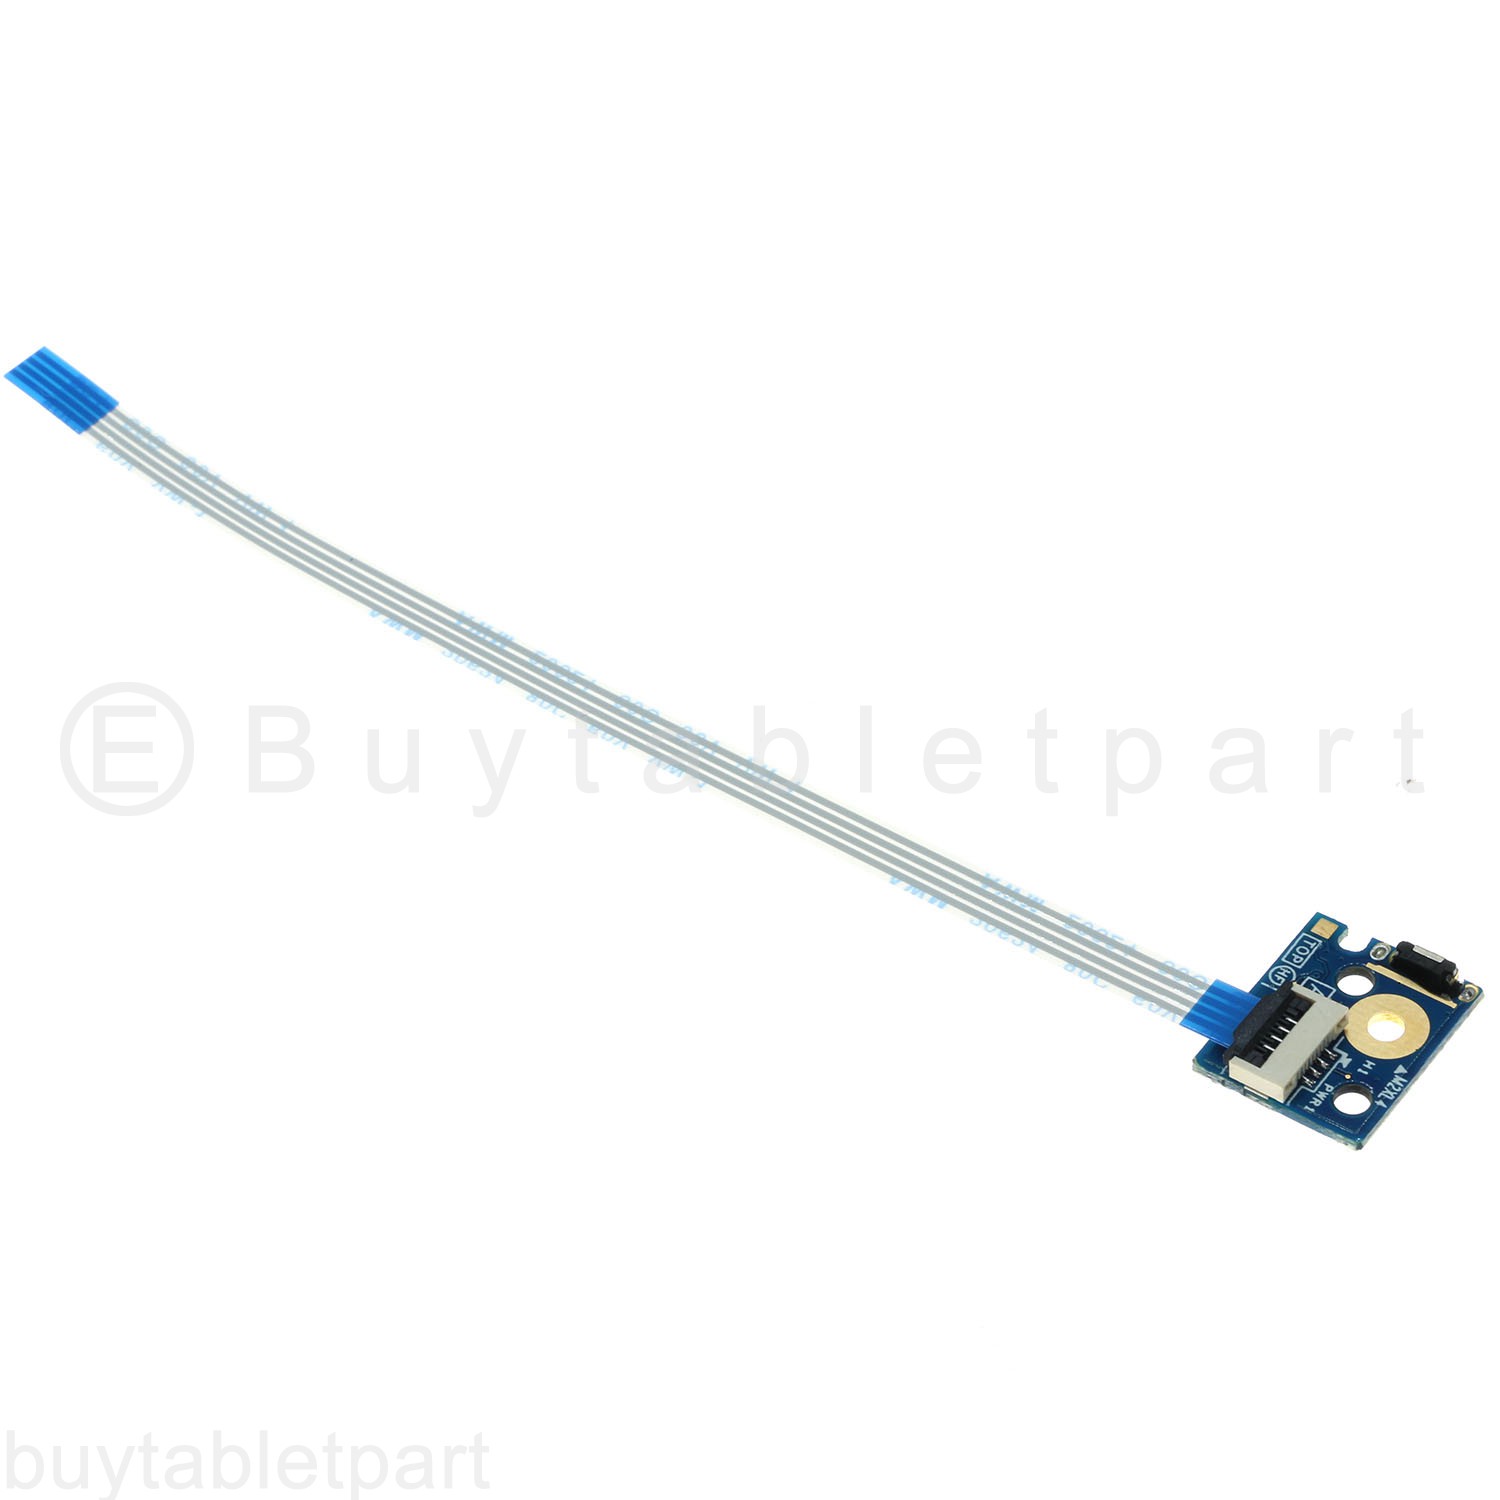 Power Button Board W Cable For Hp Pavilion 15 G074nr 15 G075nr 15 G077nr Computer Components Parts Other Laptop Replacement Parts